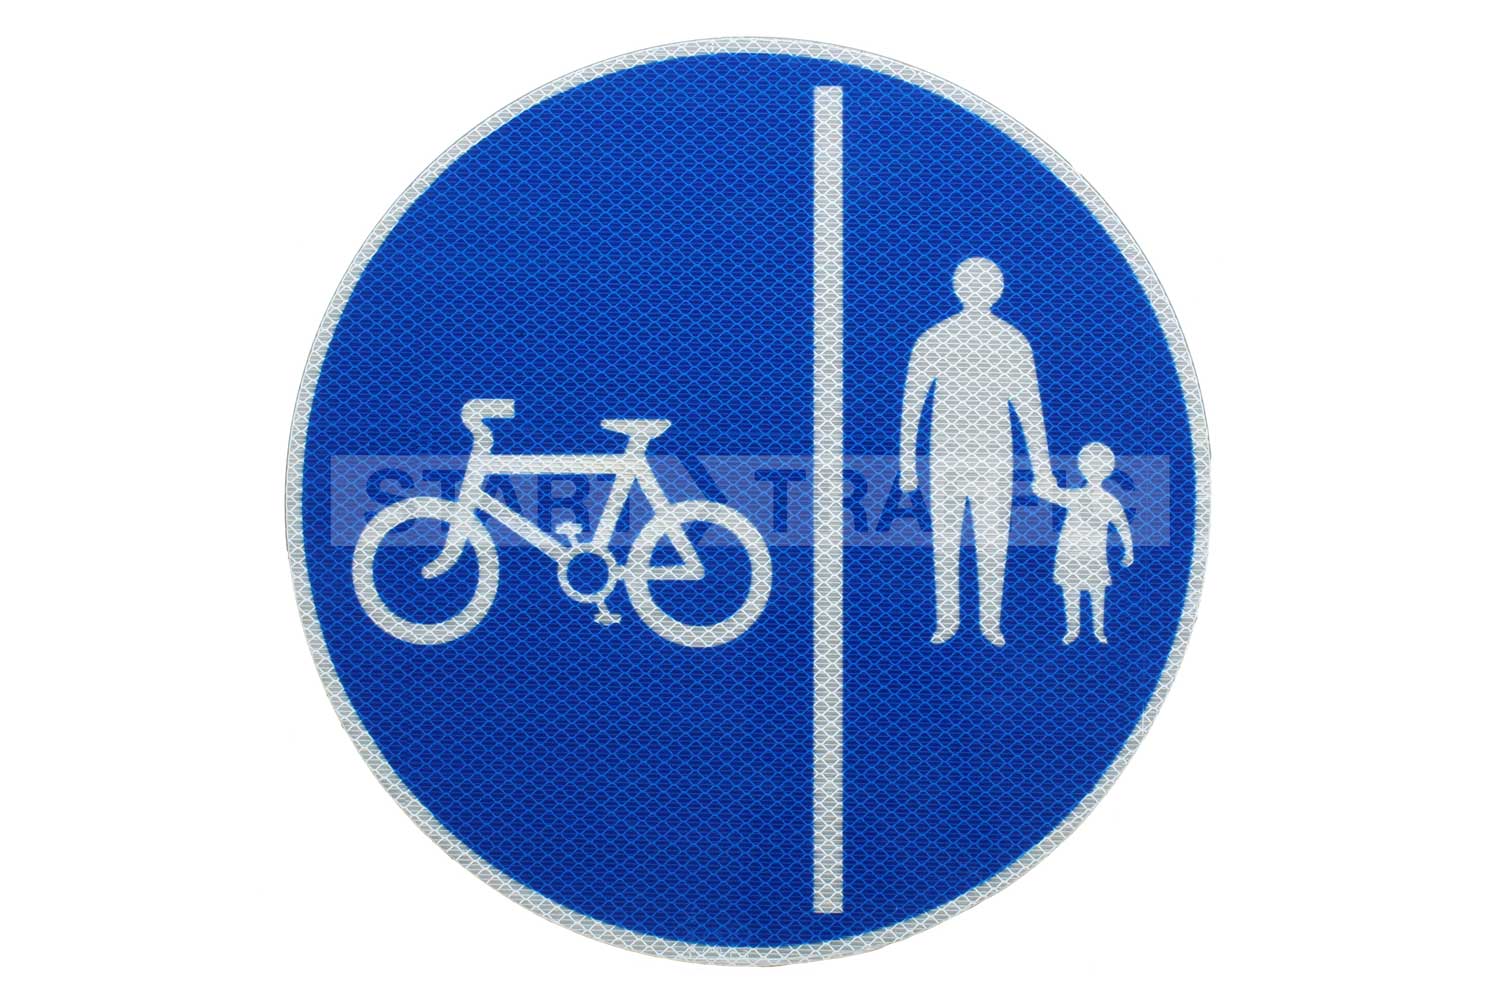 Cycle & Pedestrian route only